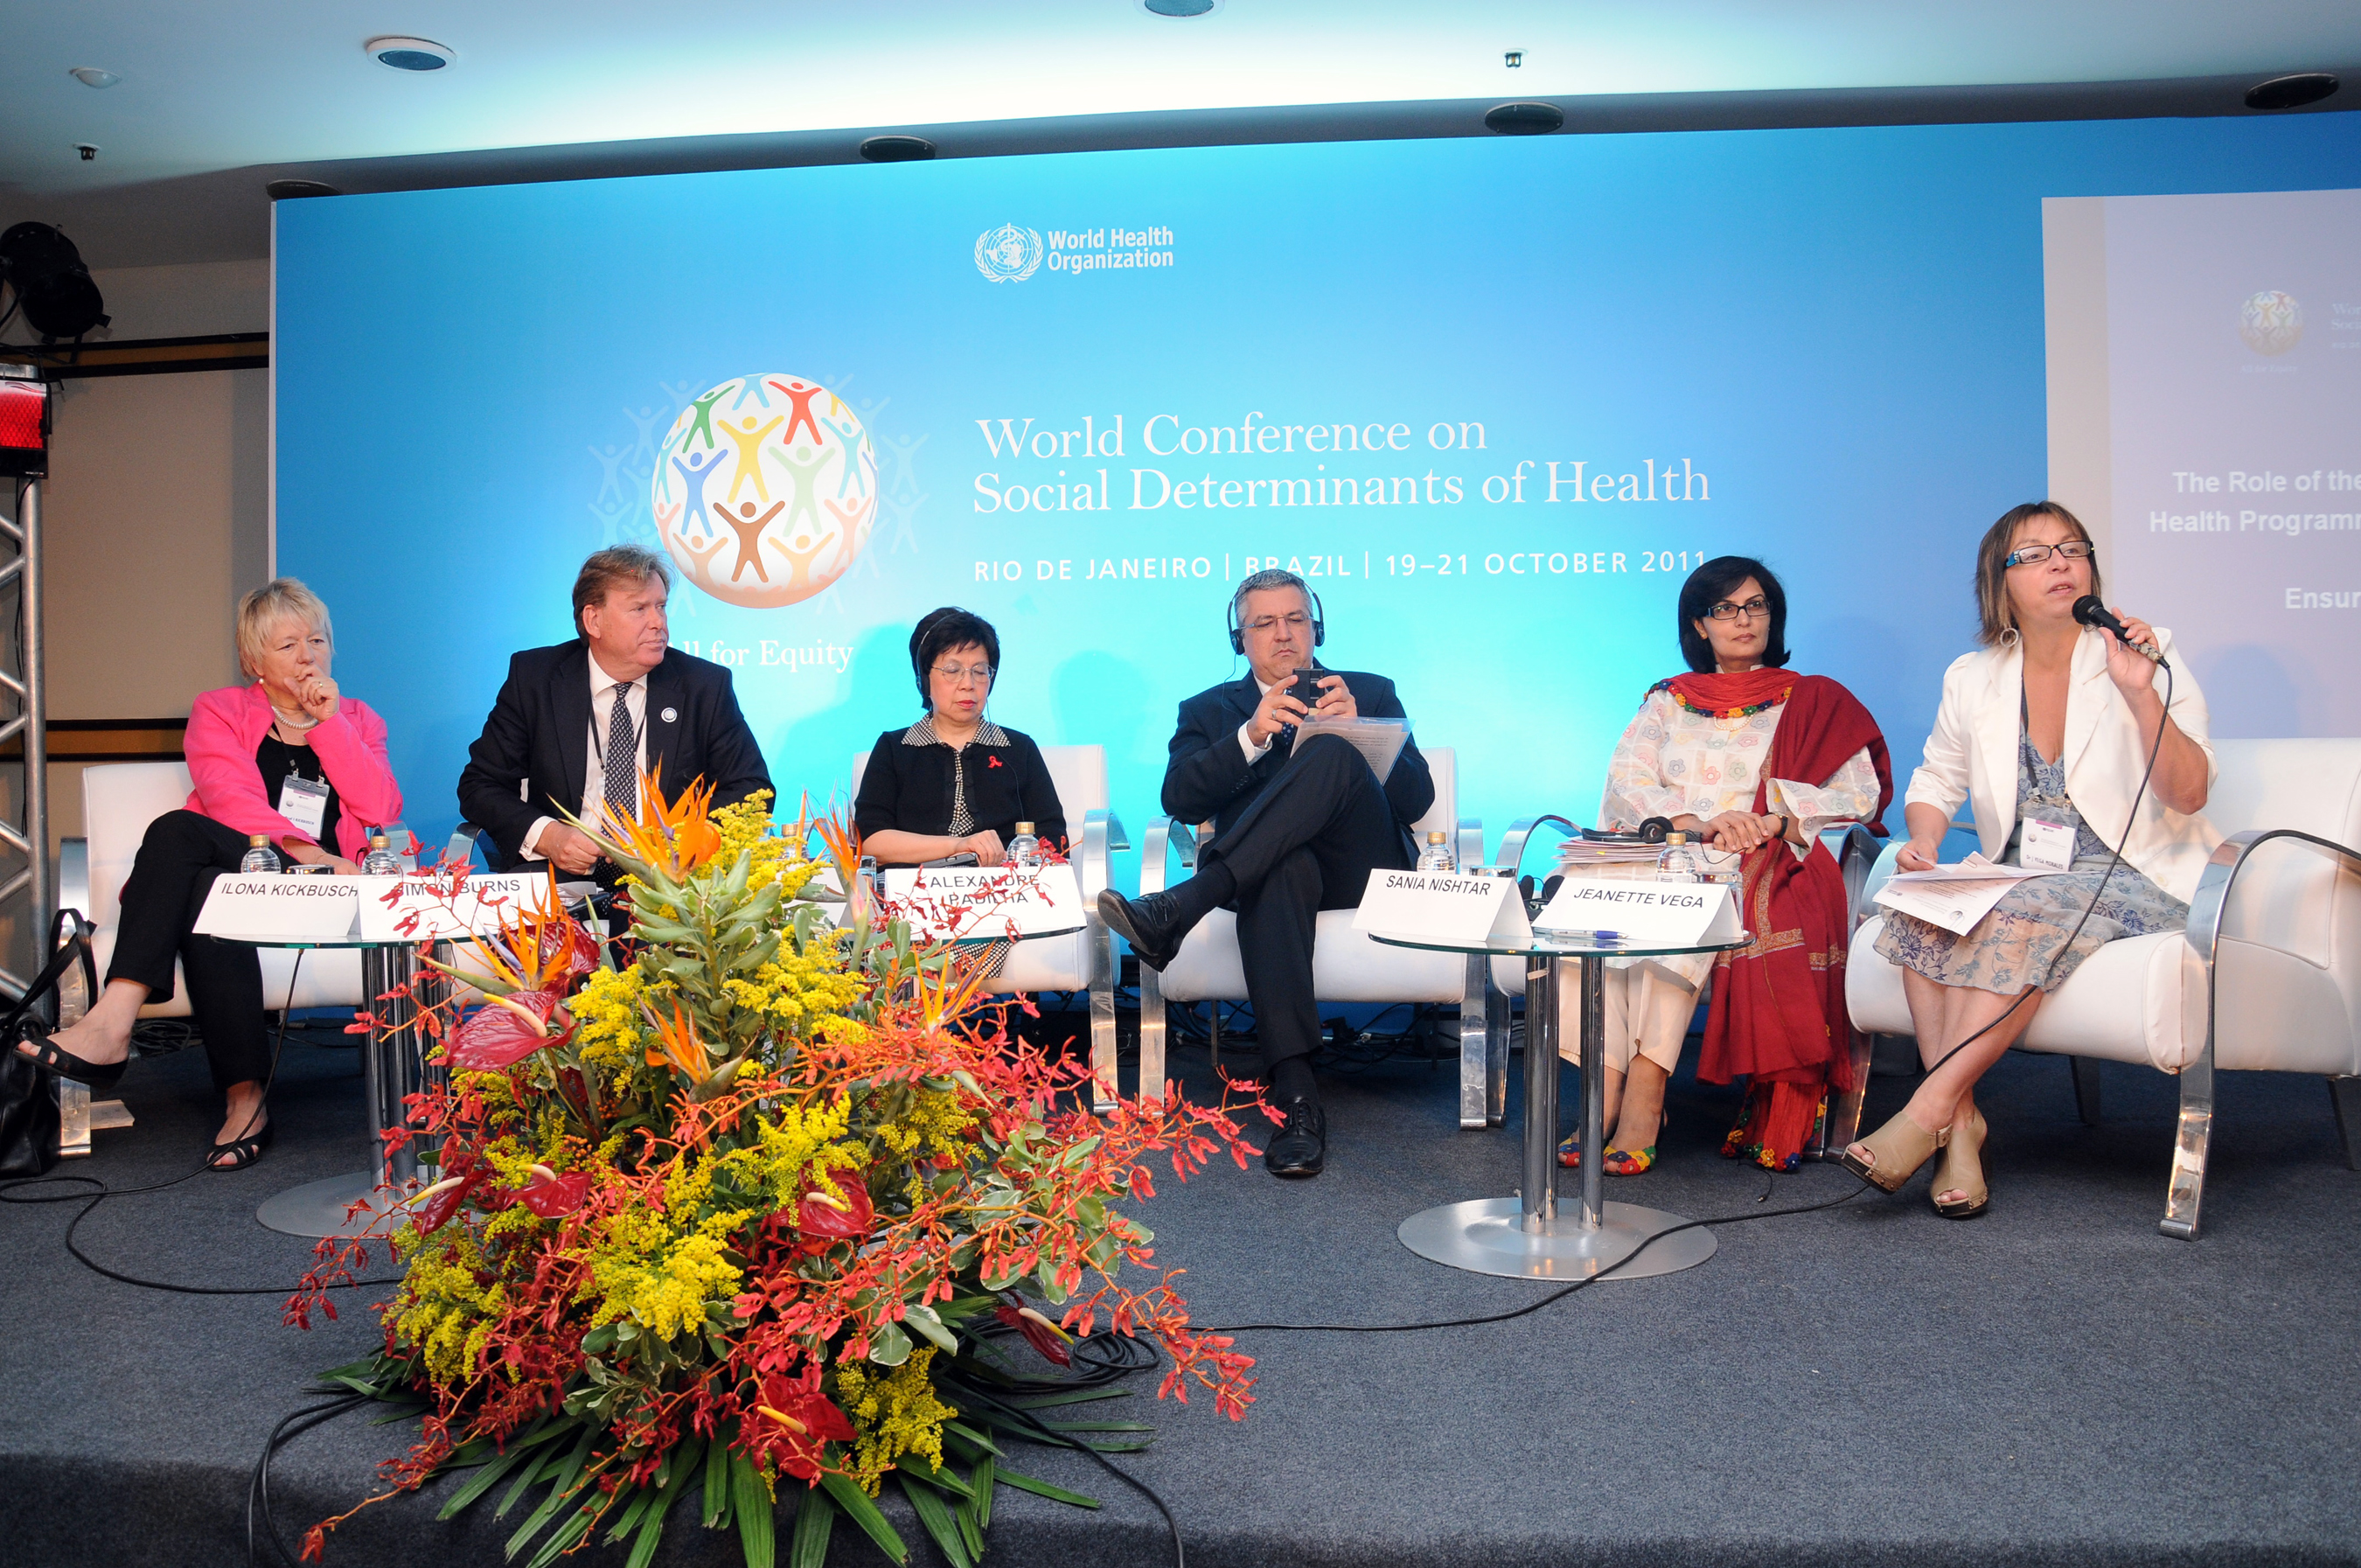  Sania Nishtar at a ministerial panel on health in Rio, October 2011.